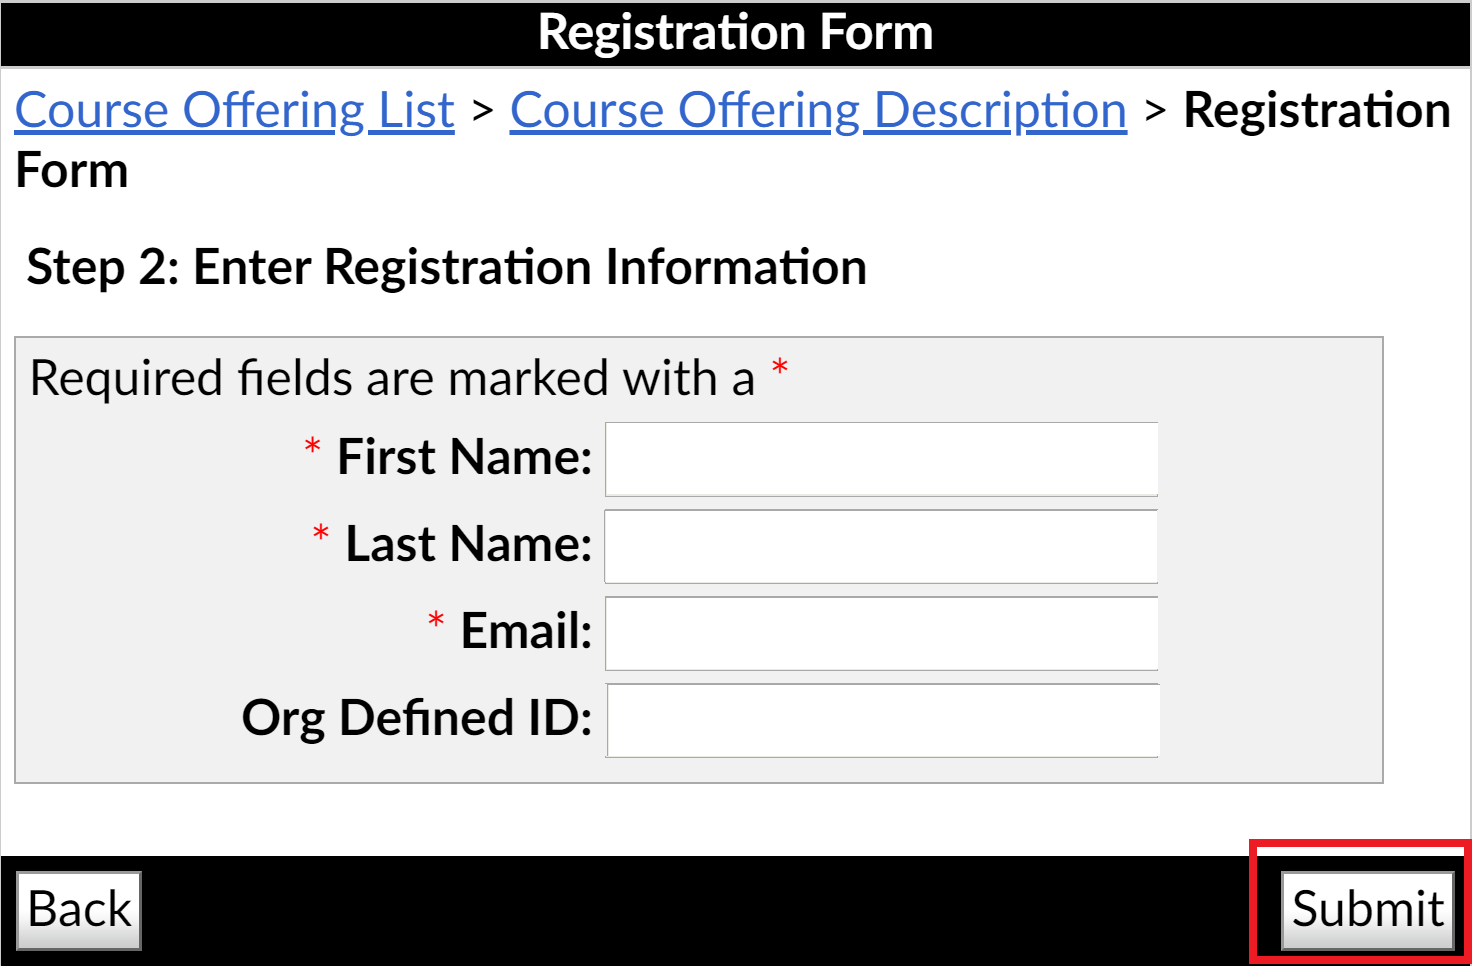 Image of the Registration form with the Submit button highlighted